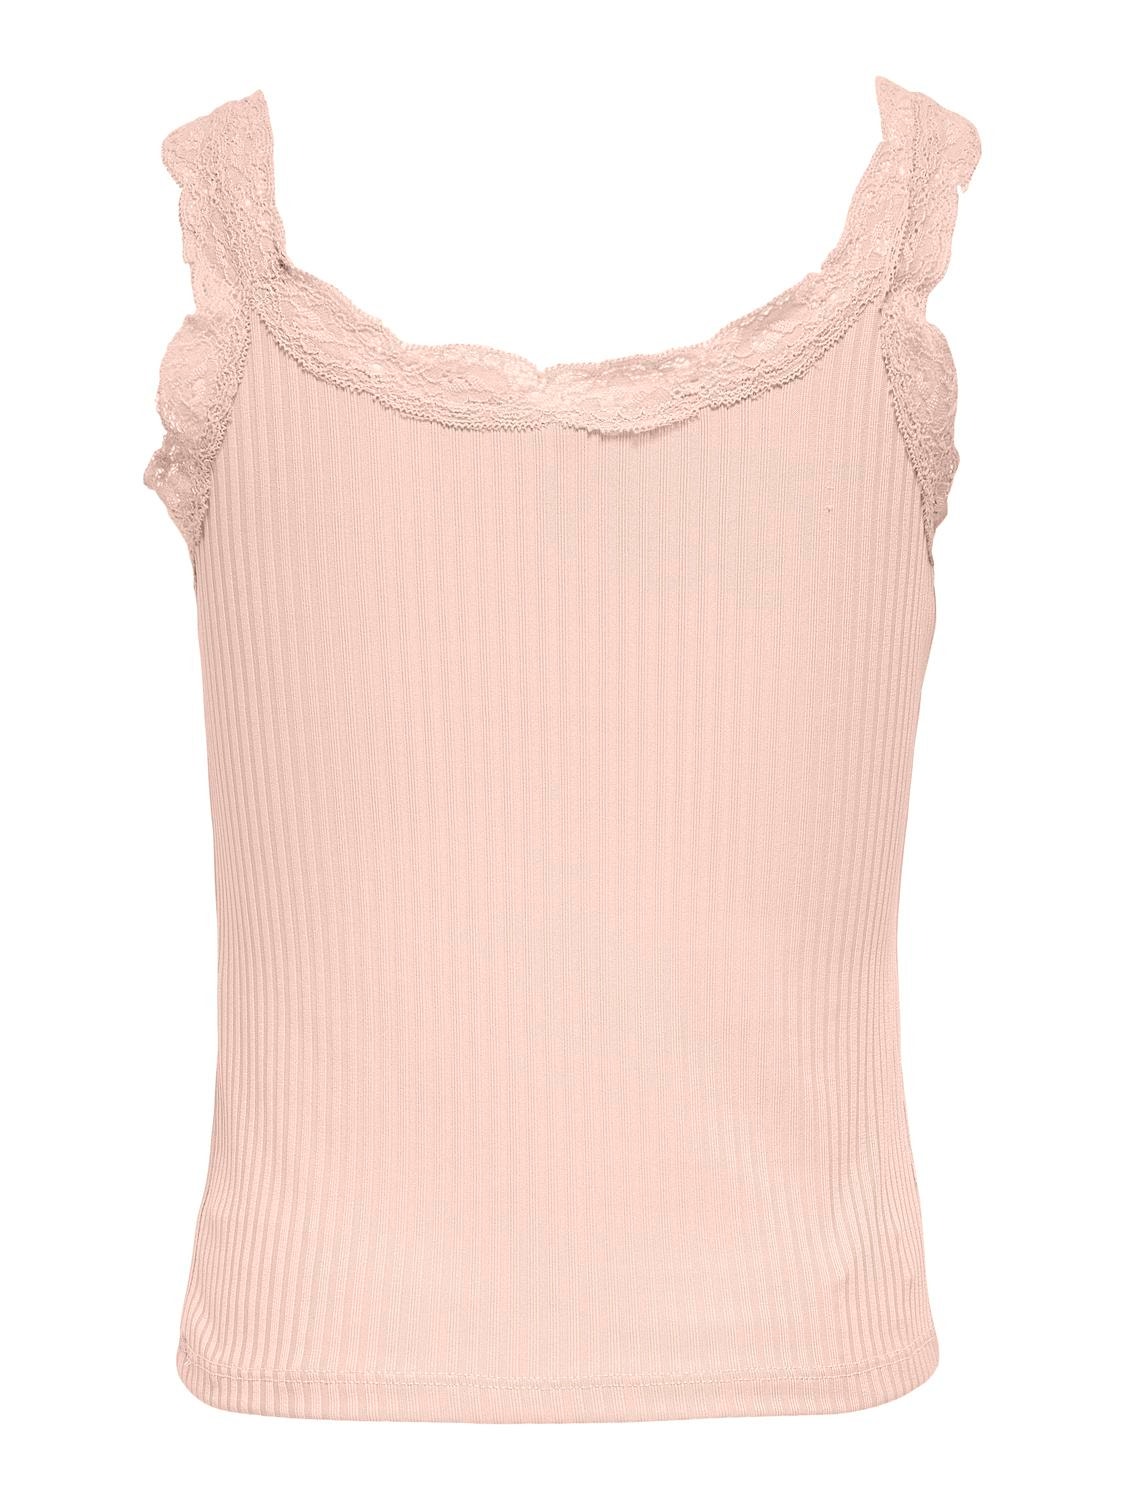 ONLY Finitions en dentelle Top -Soft Pink - 15240741